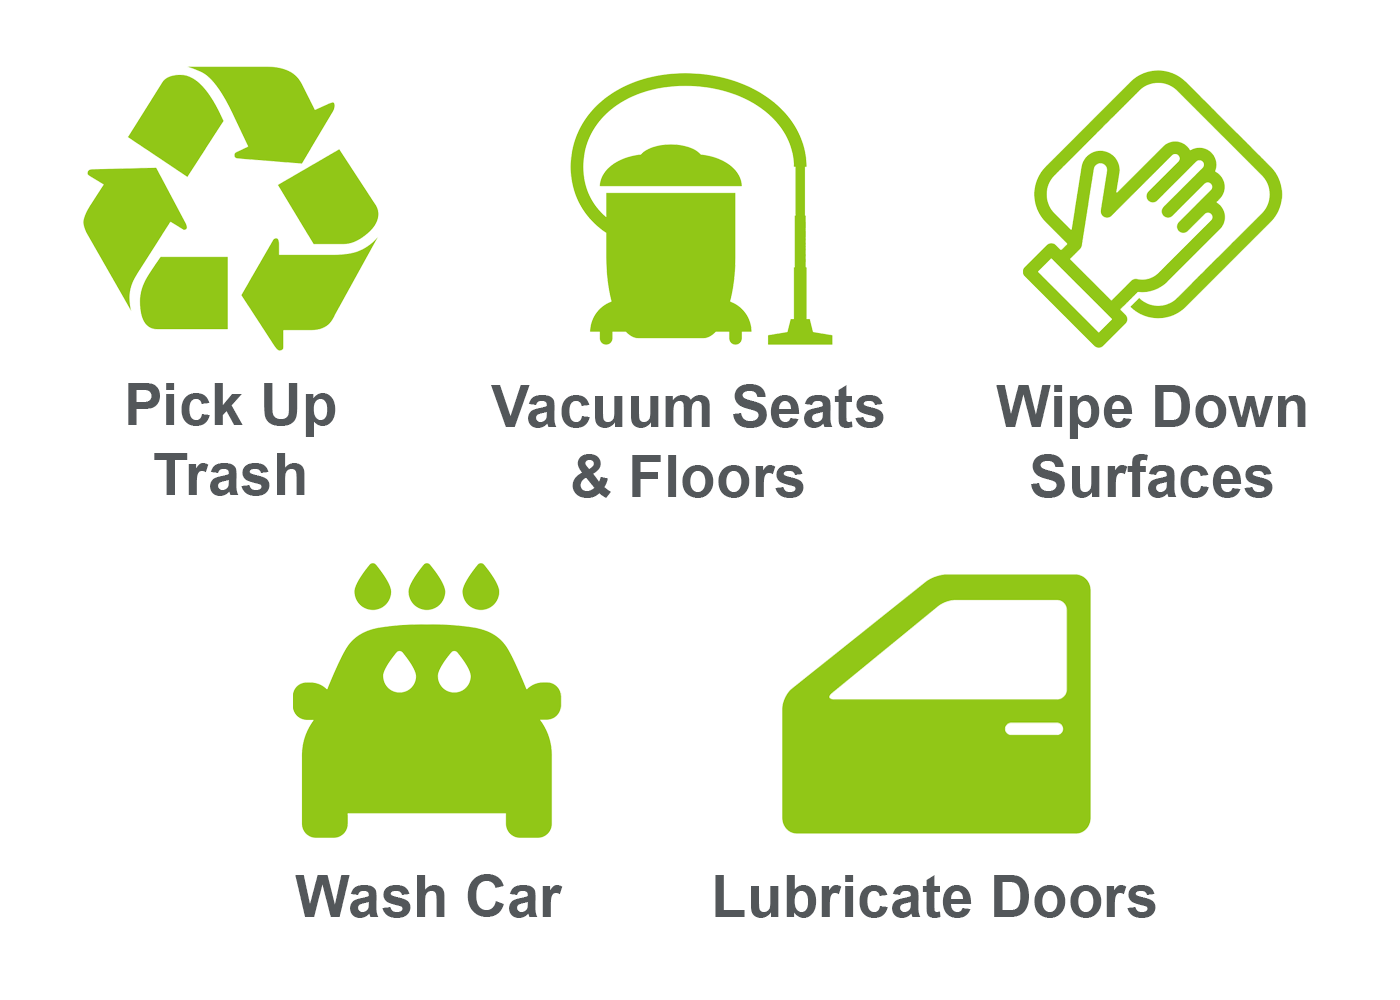 Before putting your car in storage be sure to pick up trash, vacuum seats, wipe down surfaces, wash car, and lubricate doors. 